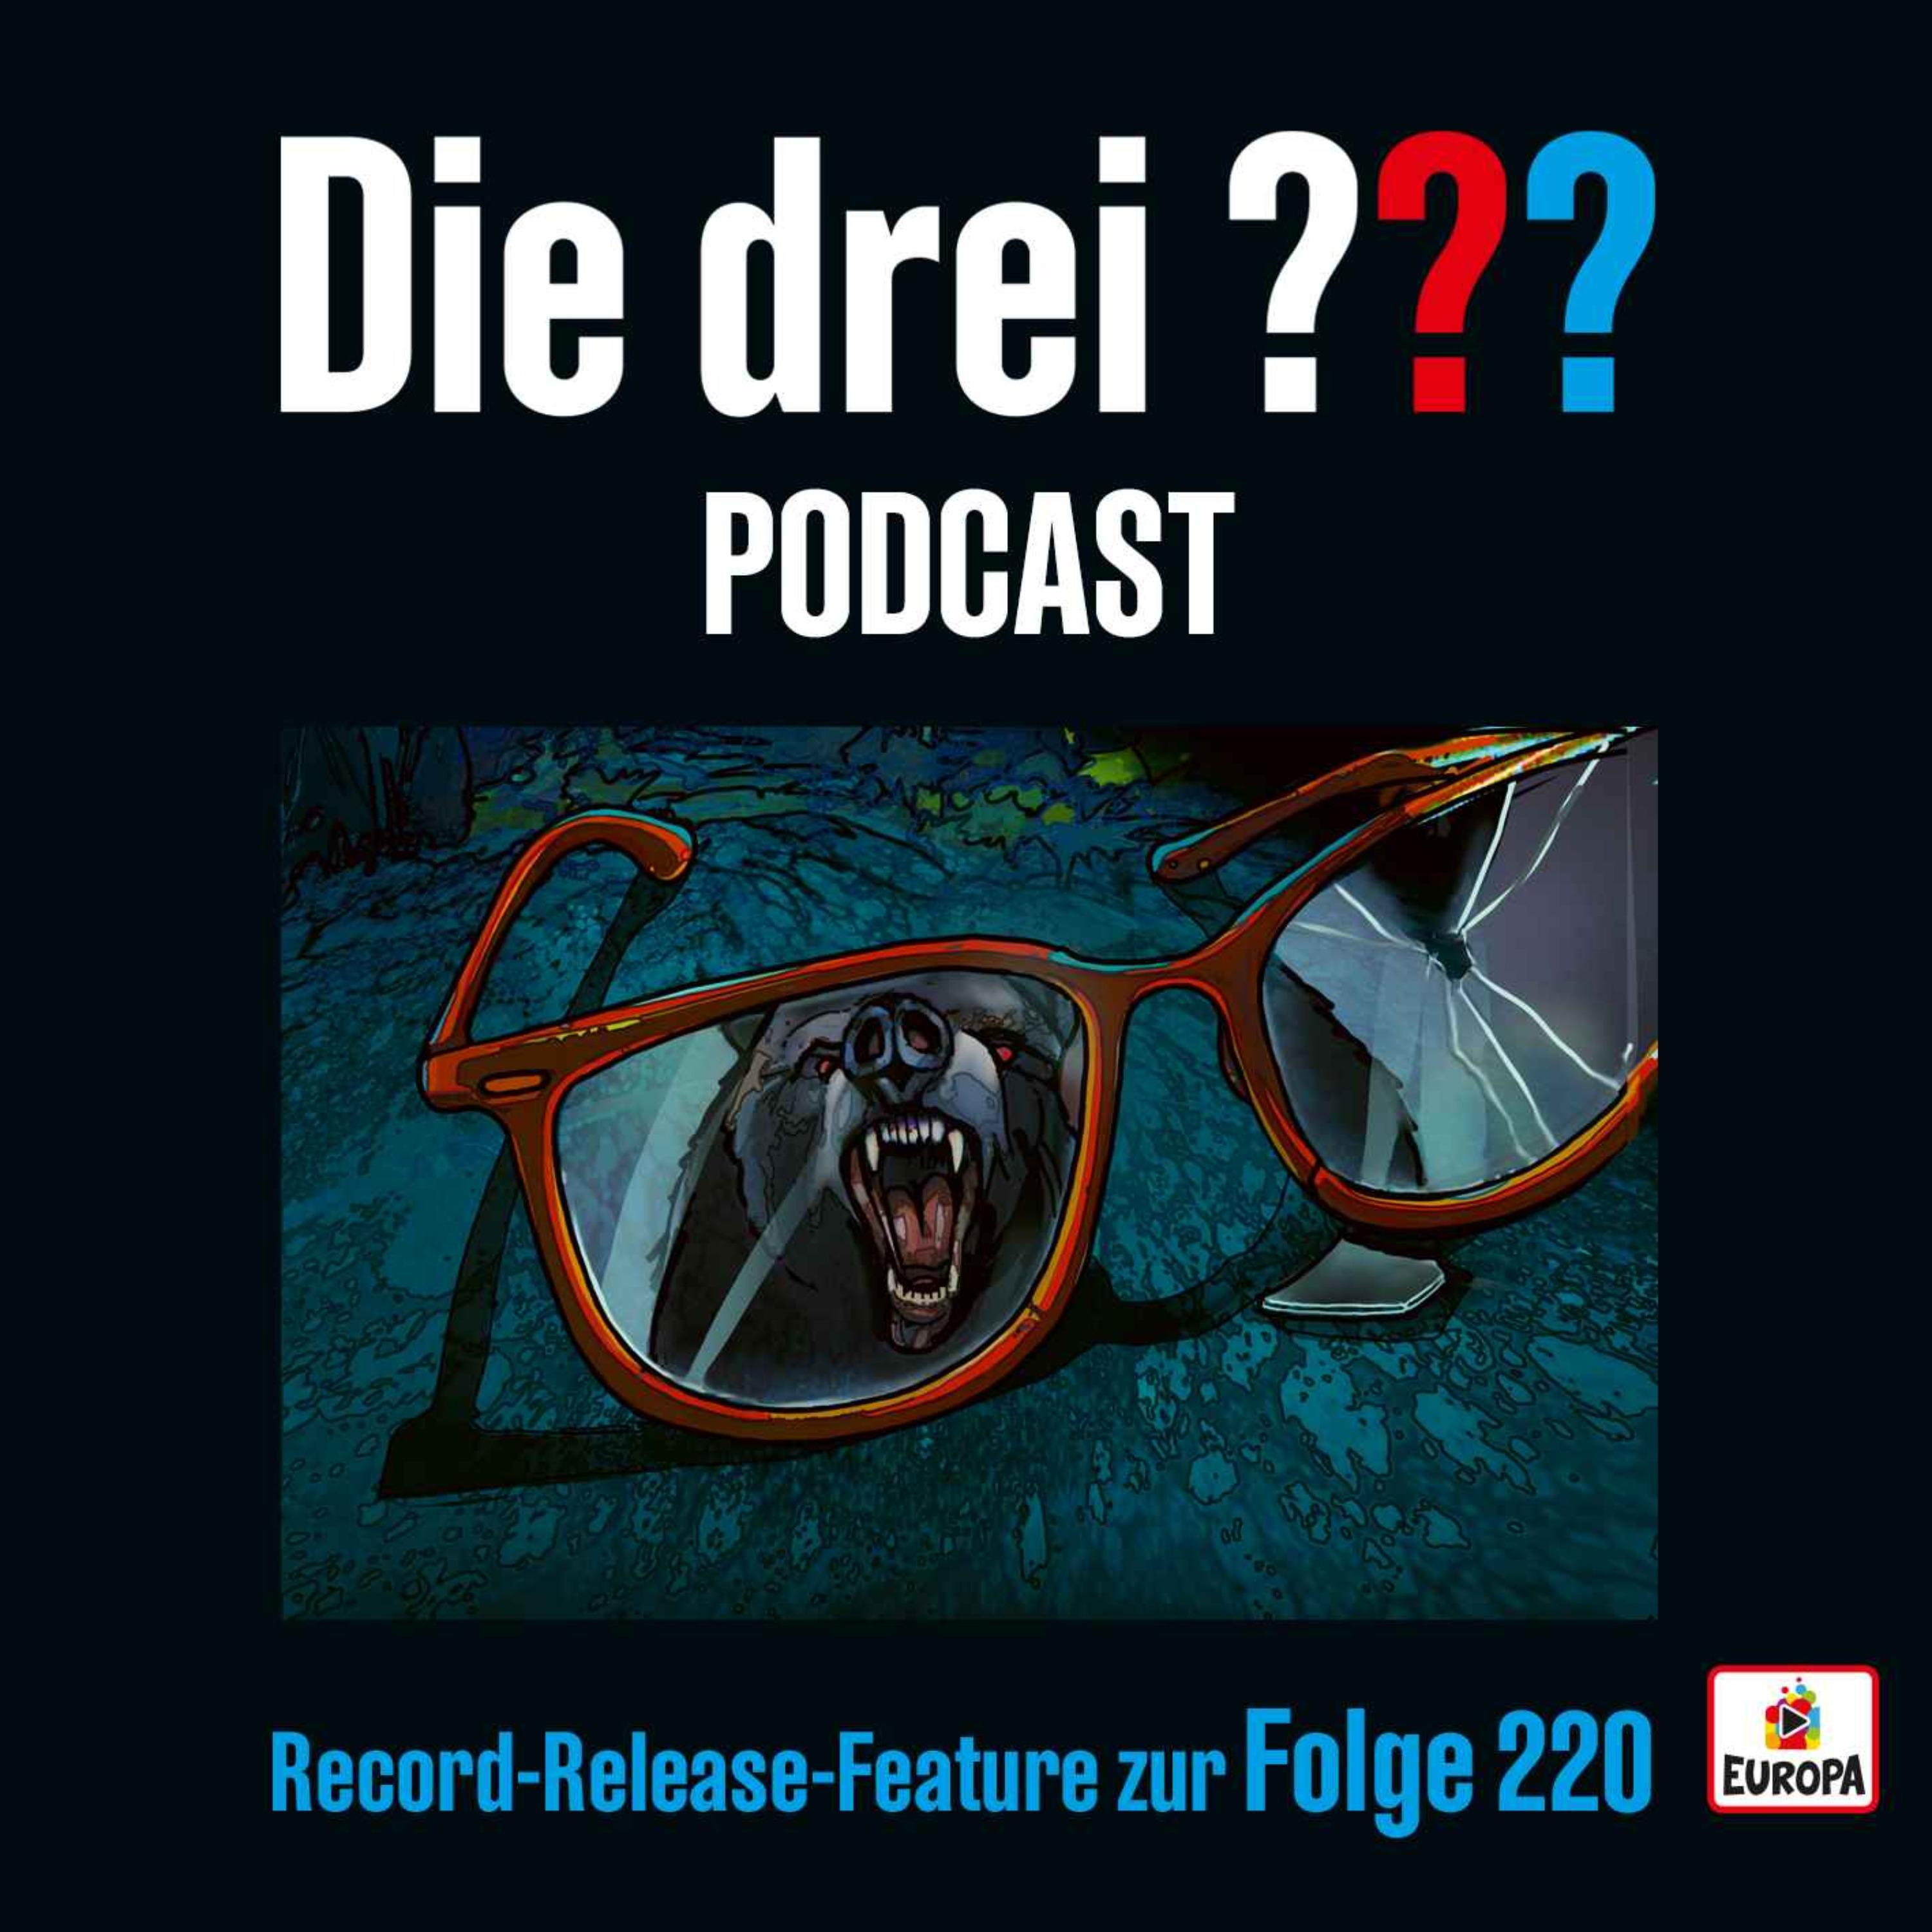 Record-Release-Feature zur Folge 220